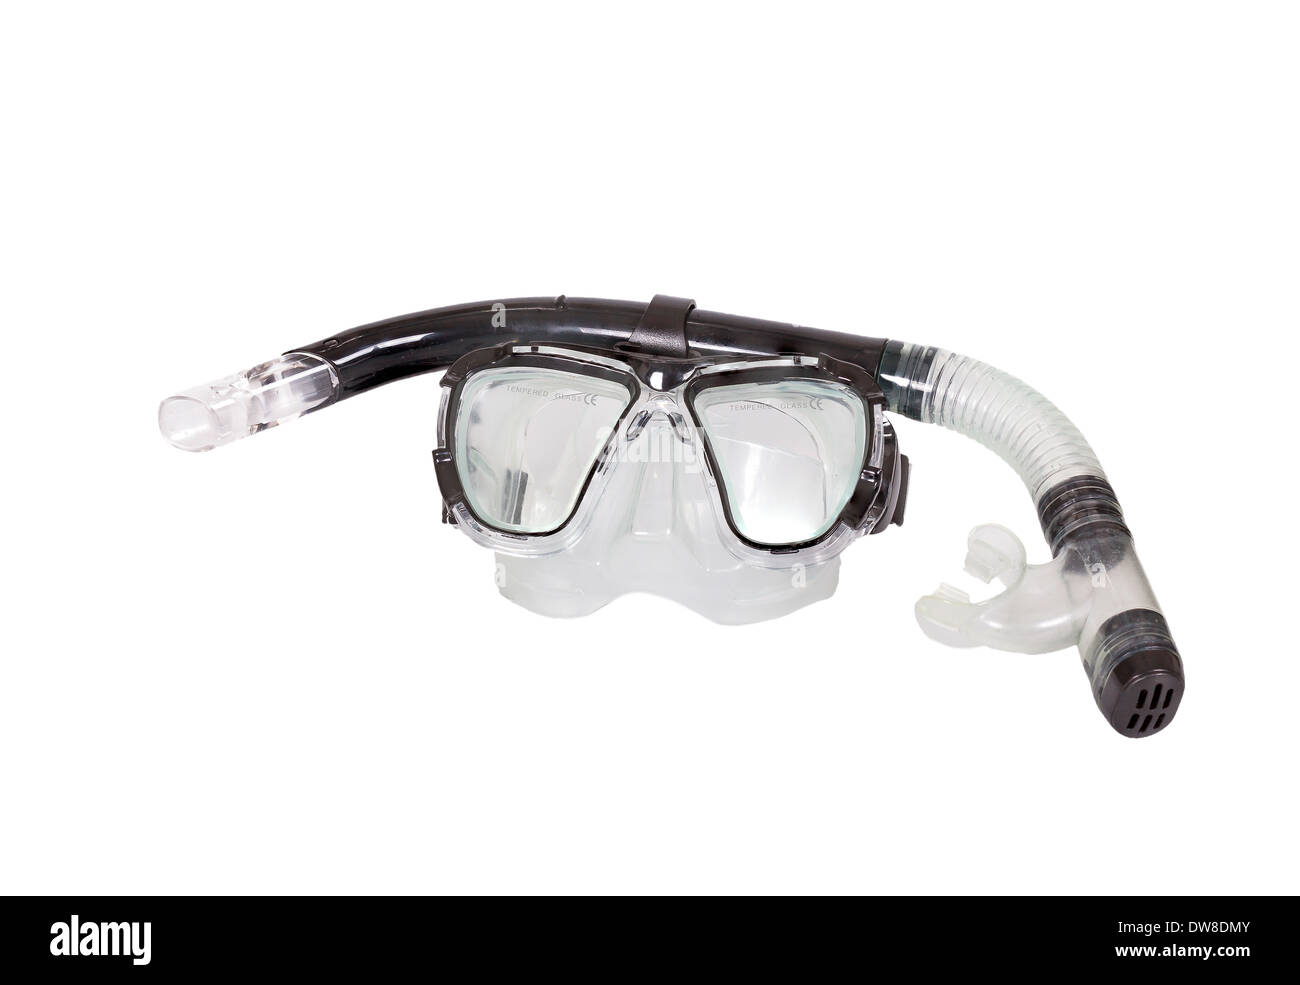 Mask and tube for diving on a white background Stock Photo